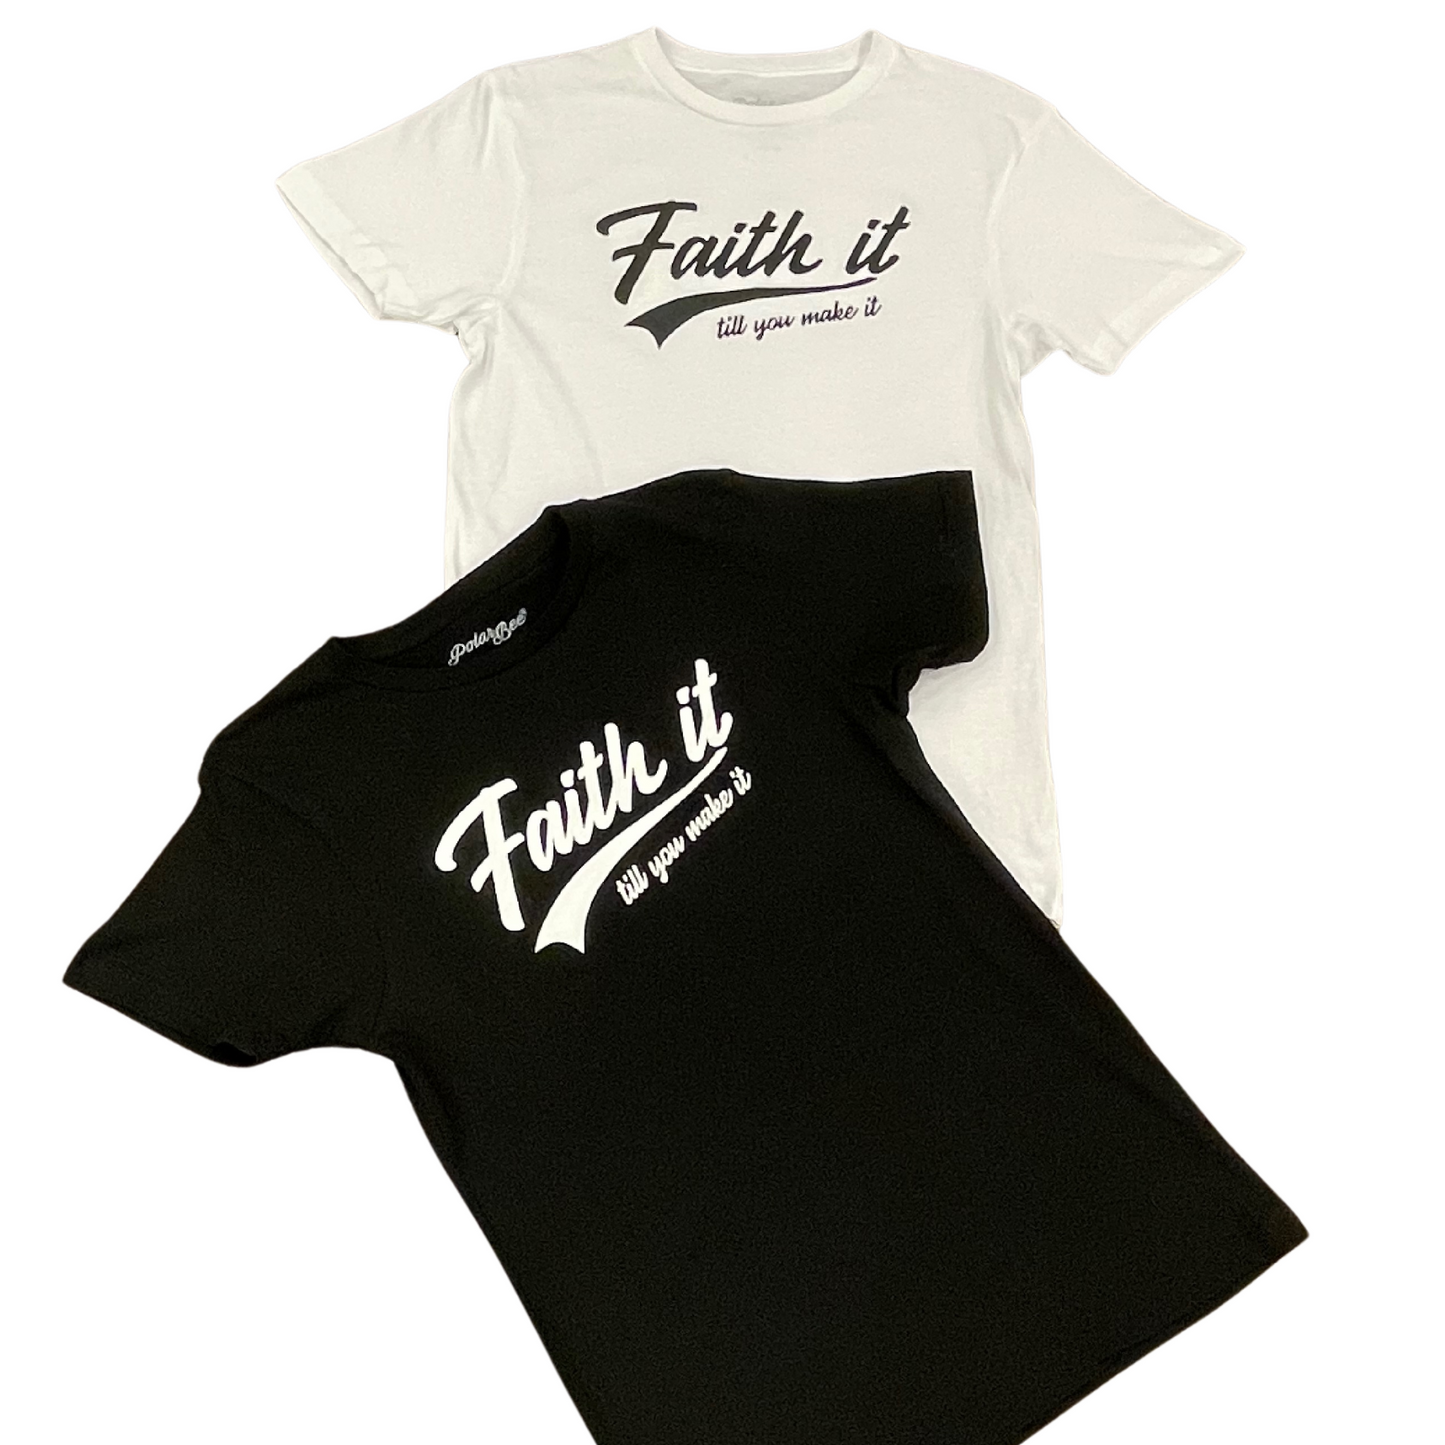 "Faith It Till You Make It" Graphic Tee White or Black (S-XL)